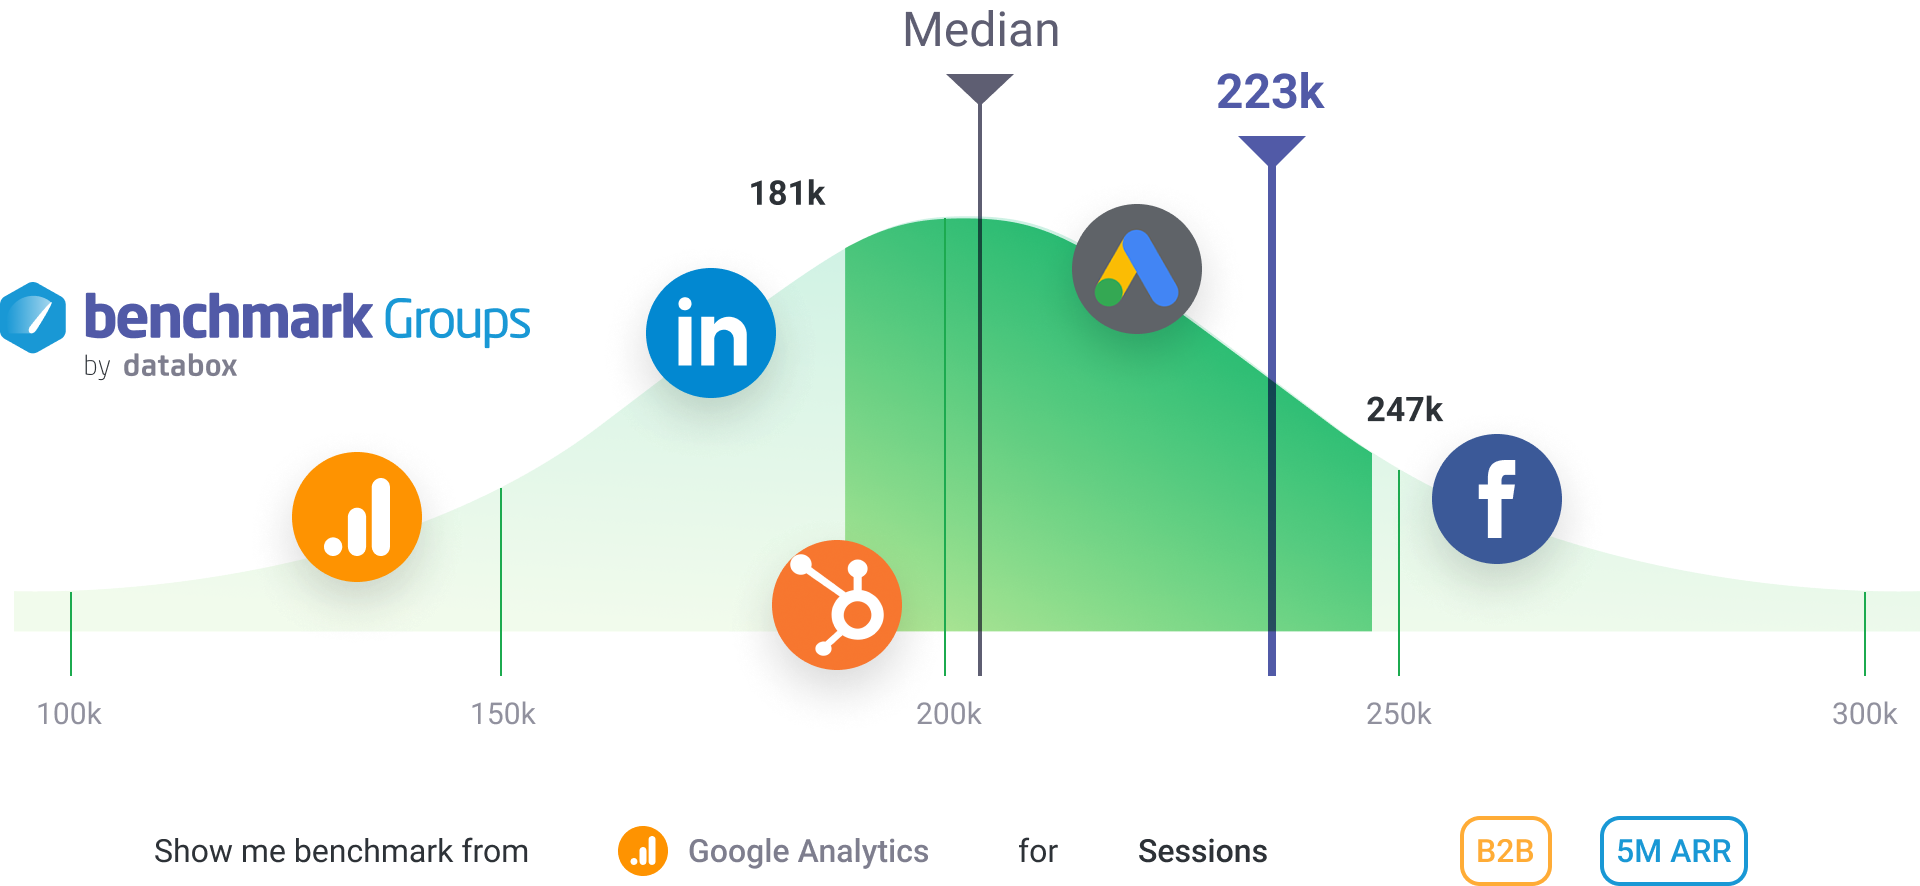 a screenshot of a chart in our free benchmarking tool, showing where the median performance compared to the upper and lower quartile, on platforms like LinkedIn, Facebook, HubSpot and more.